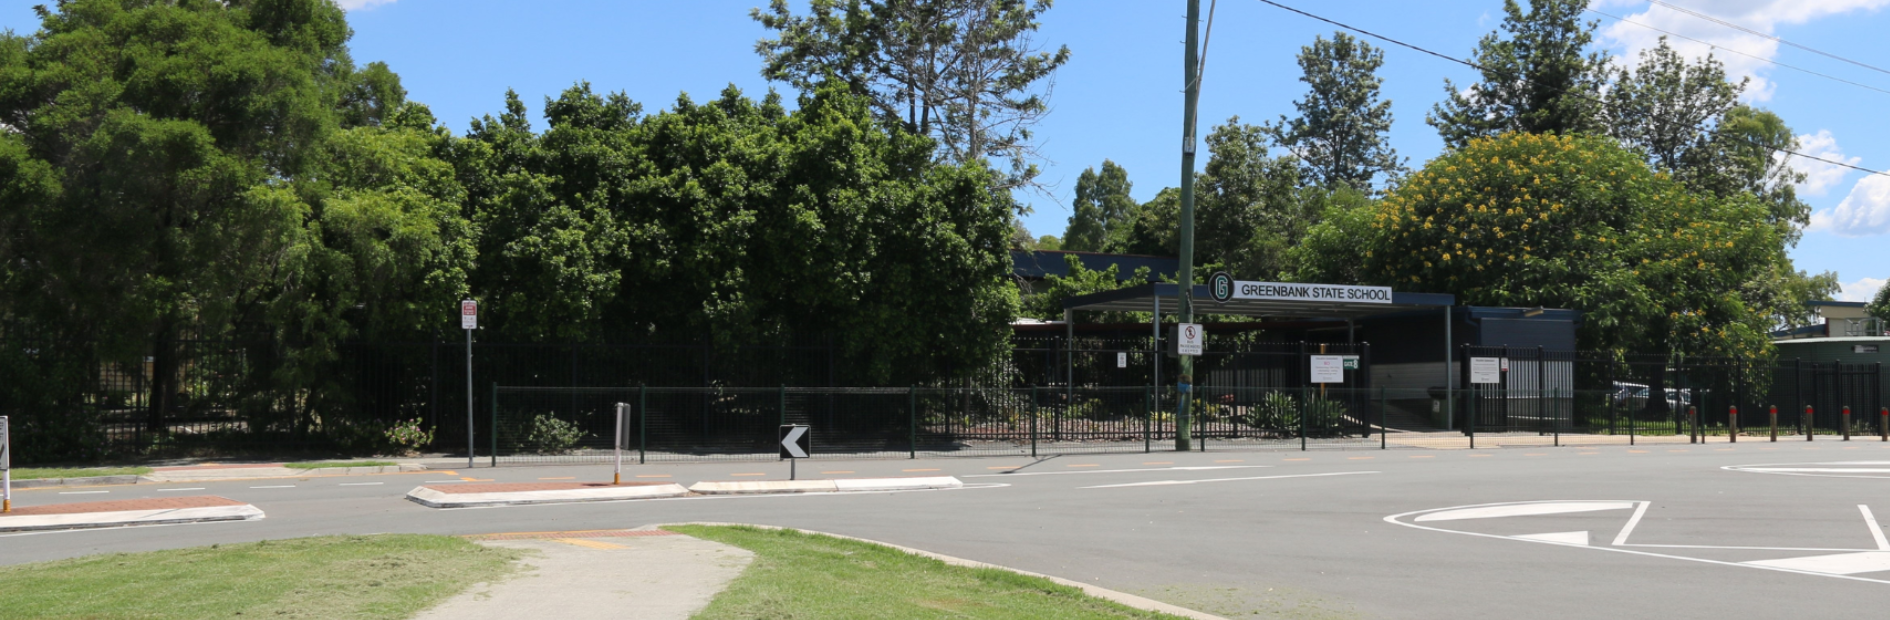 The entrance from Goodna Road to the Greenbank State School